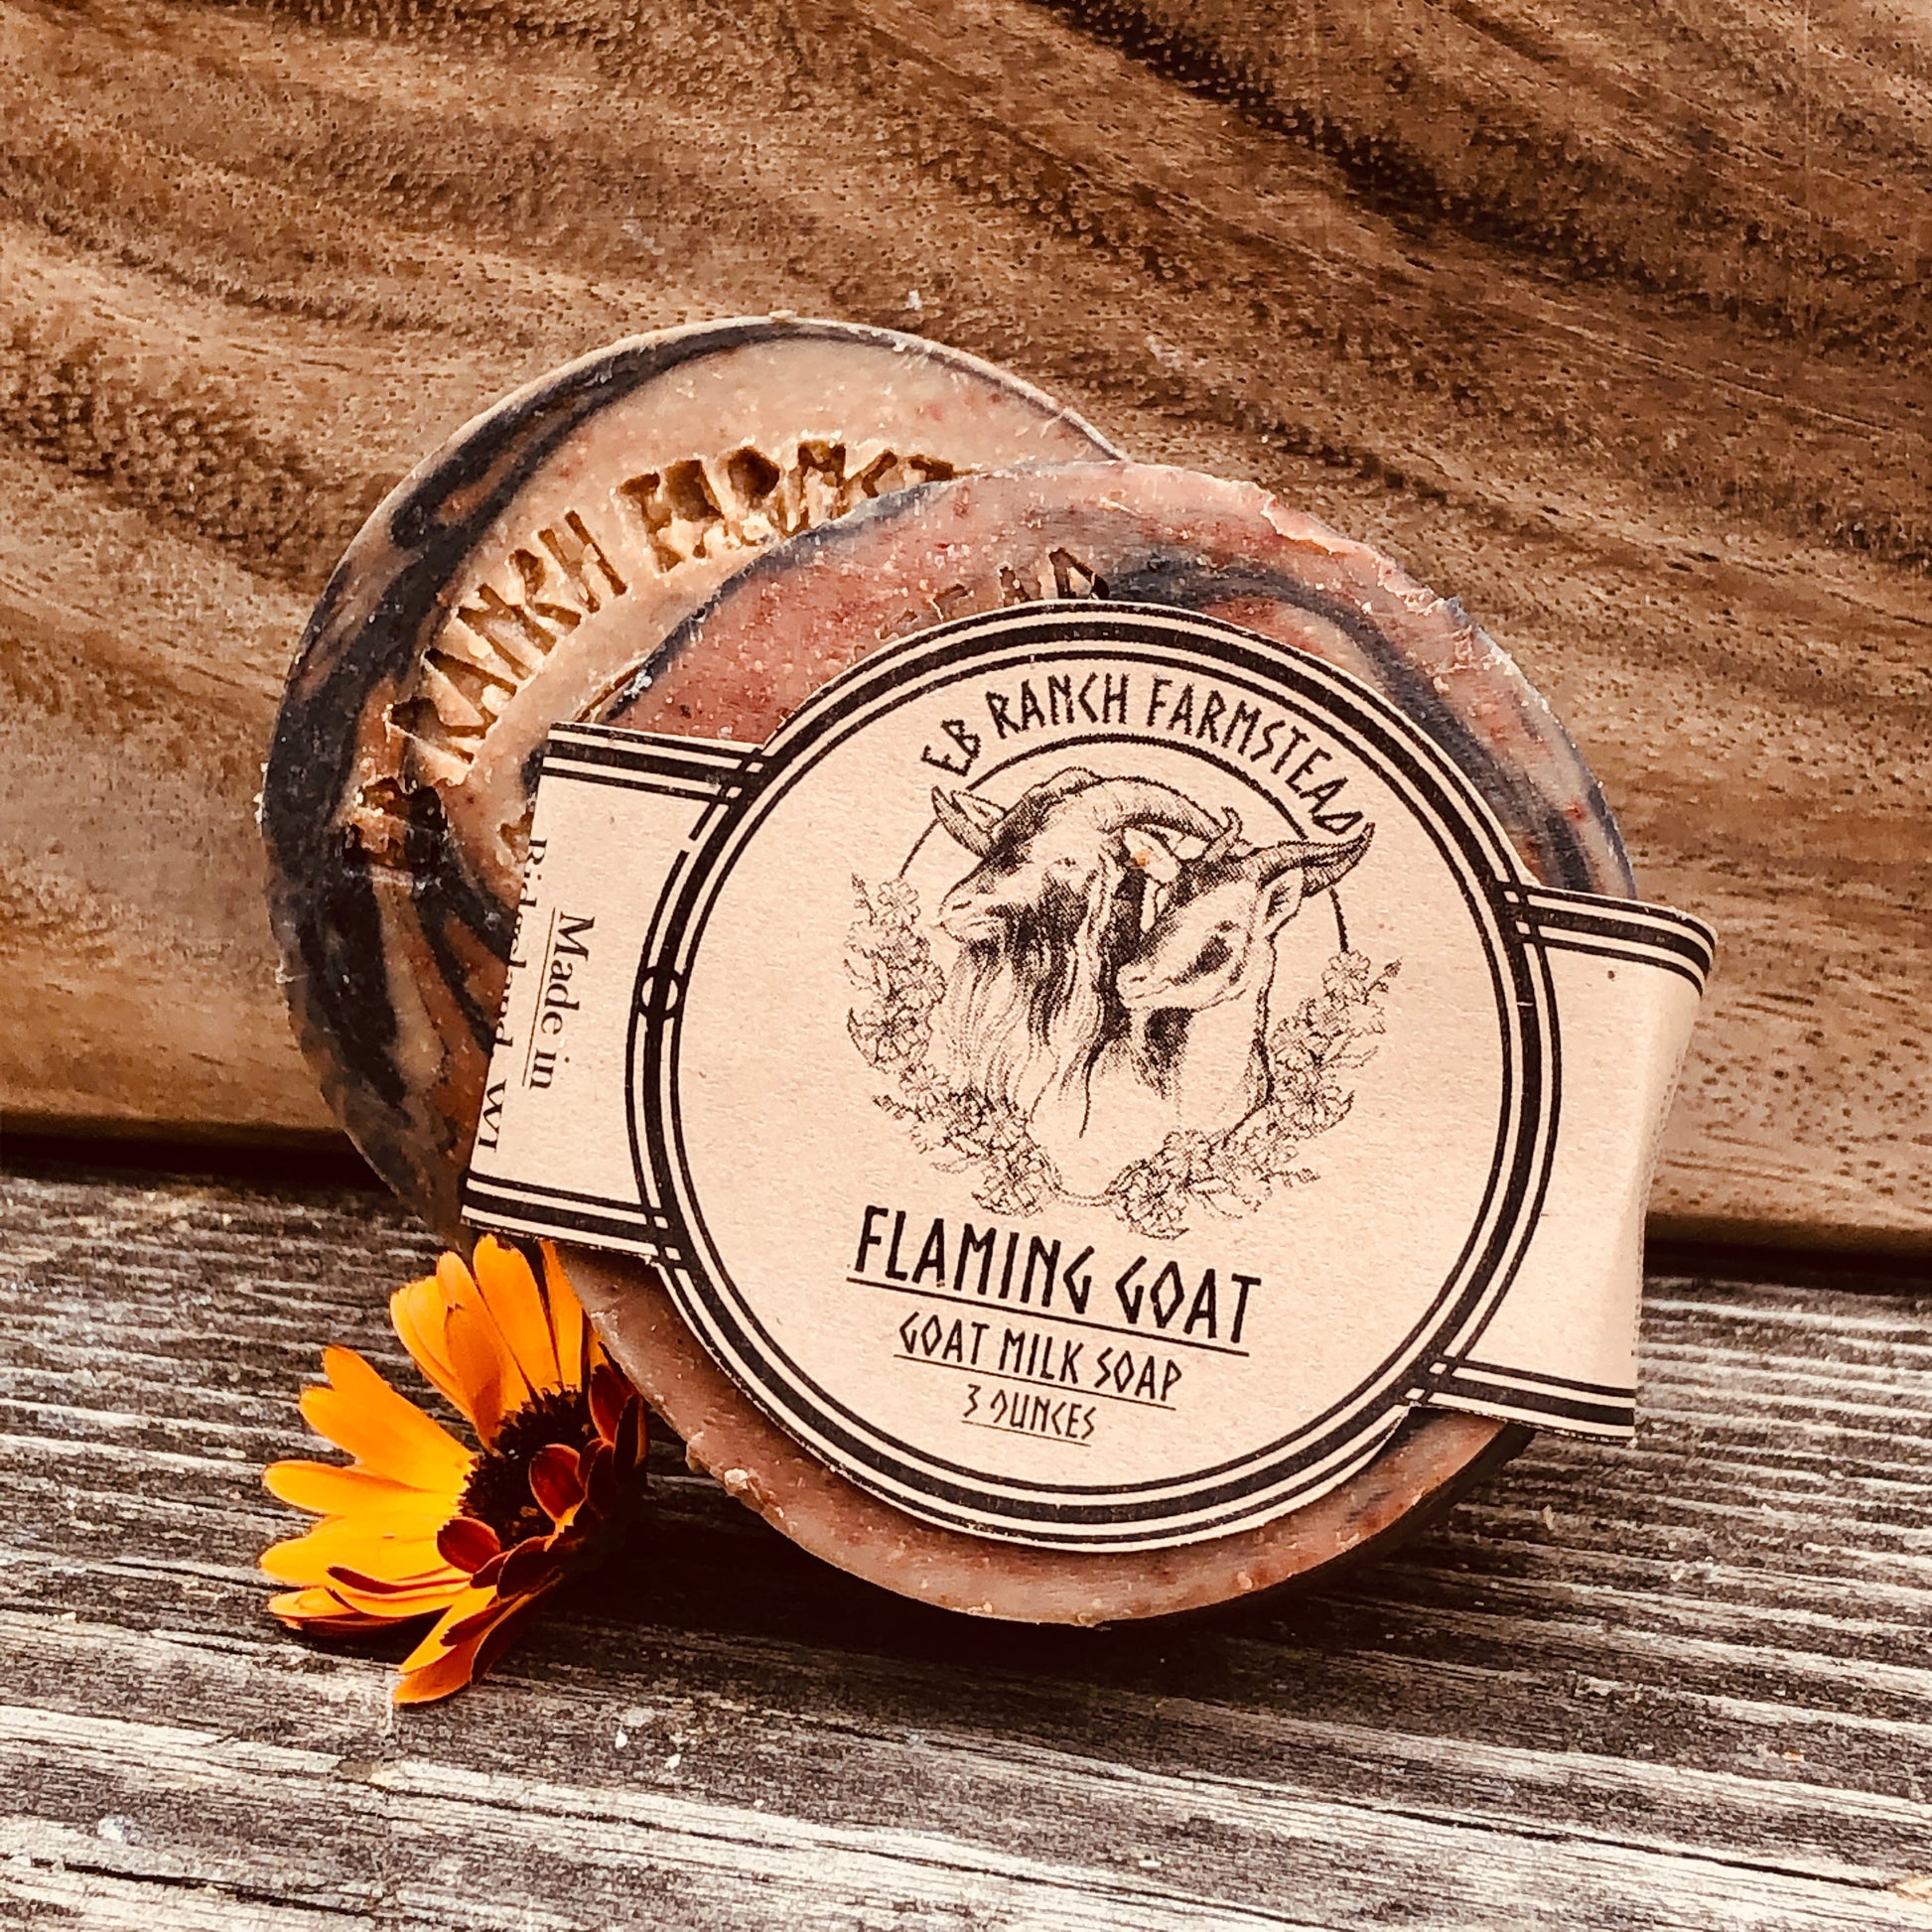 Goat Milk Melt & Pour Soap - The Flaming Candle Company